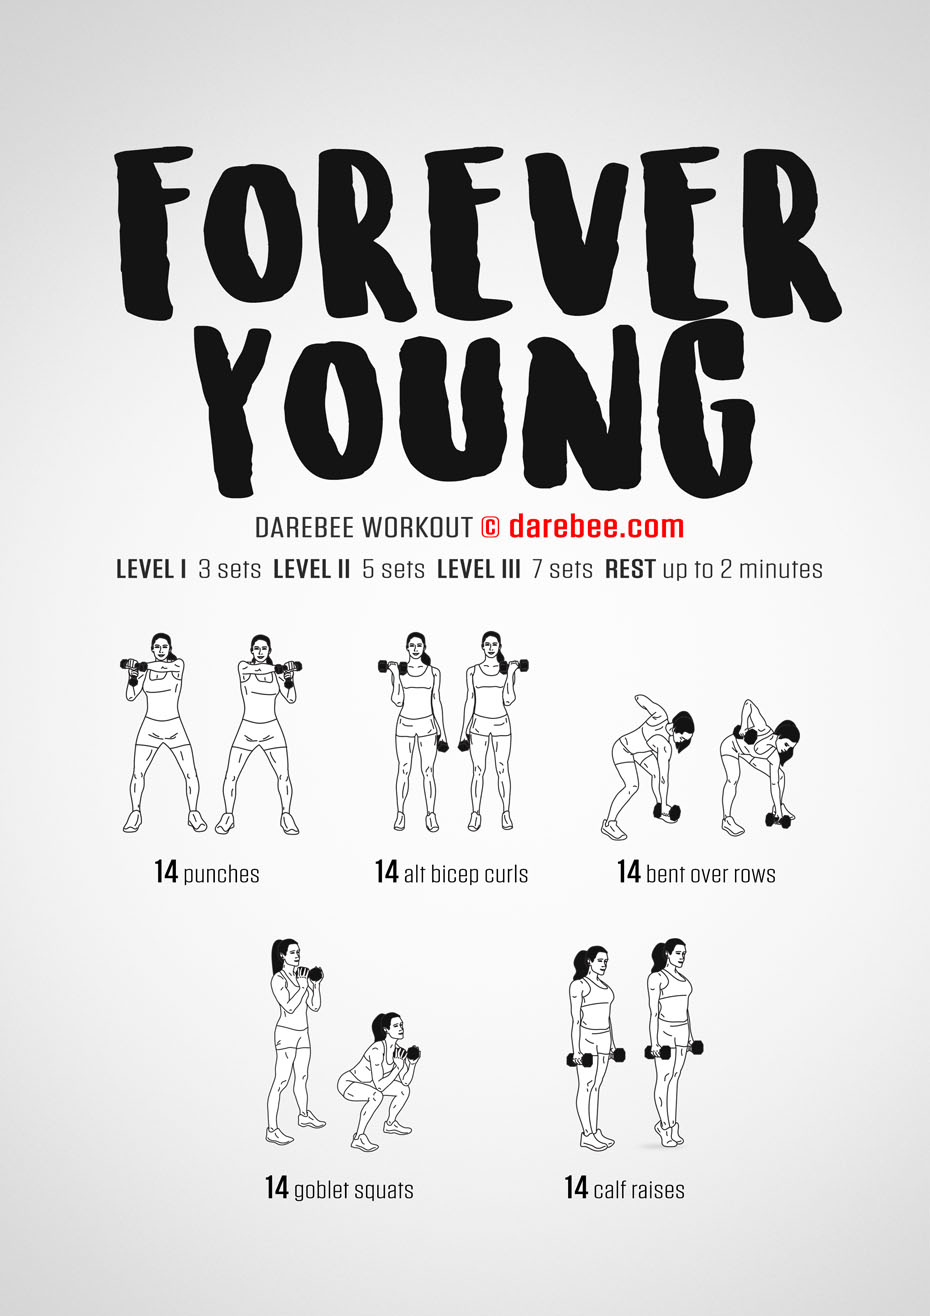 Forever Young is a Darebee home-fitness weights training program that will help you get healthy and feel strong, faster.